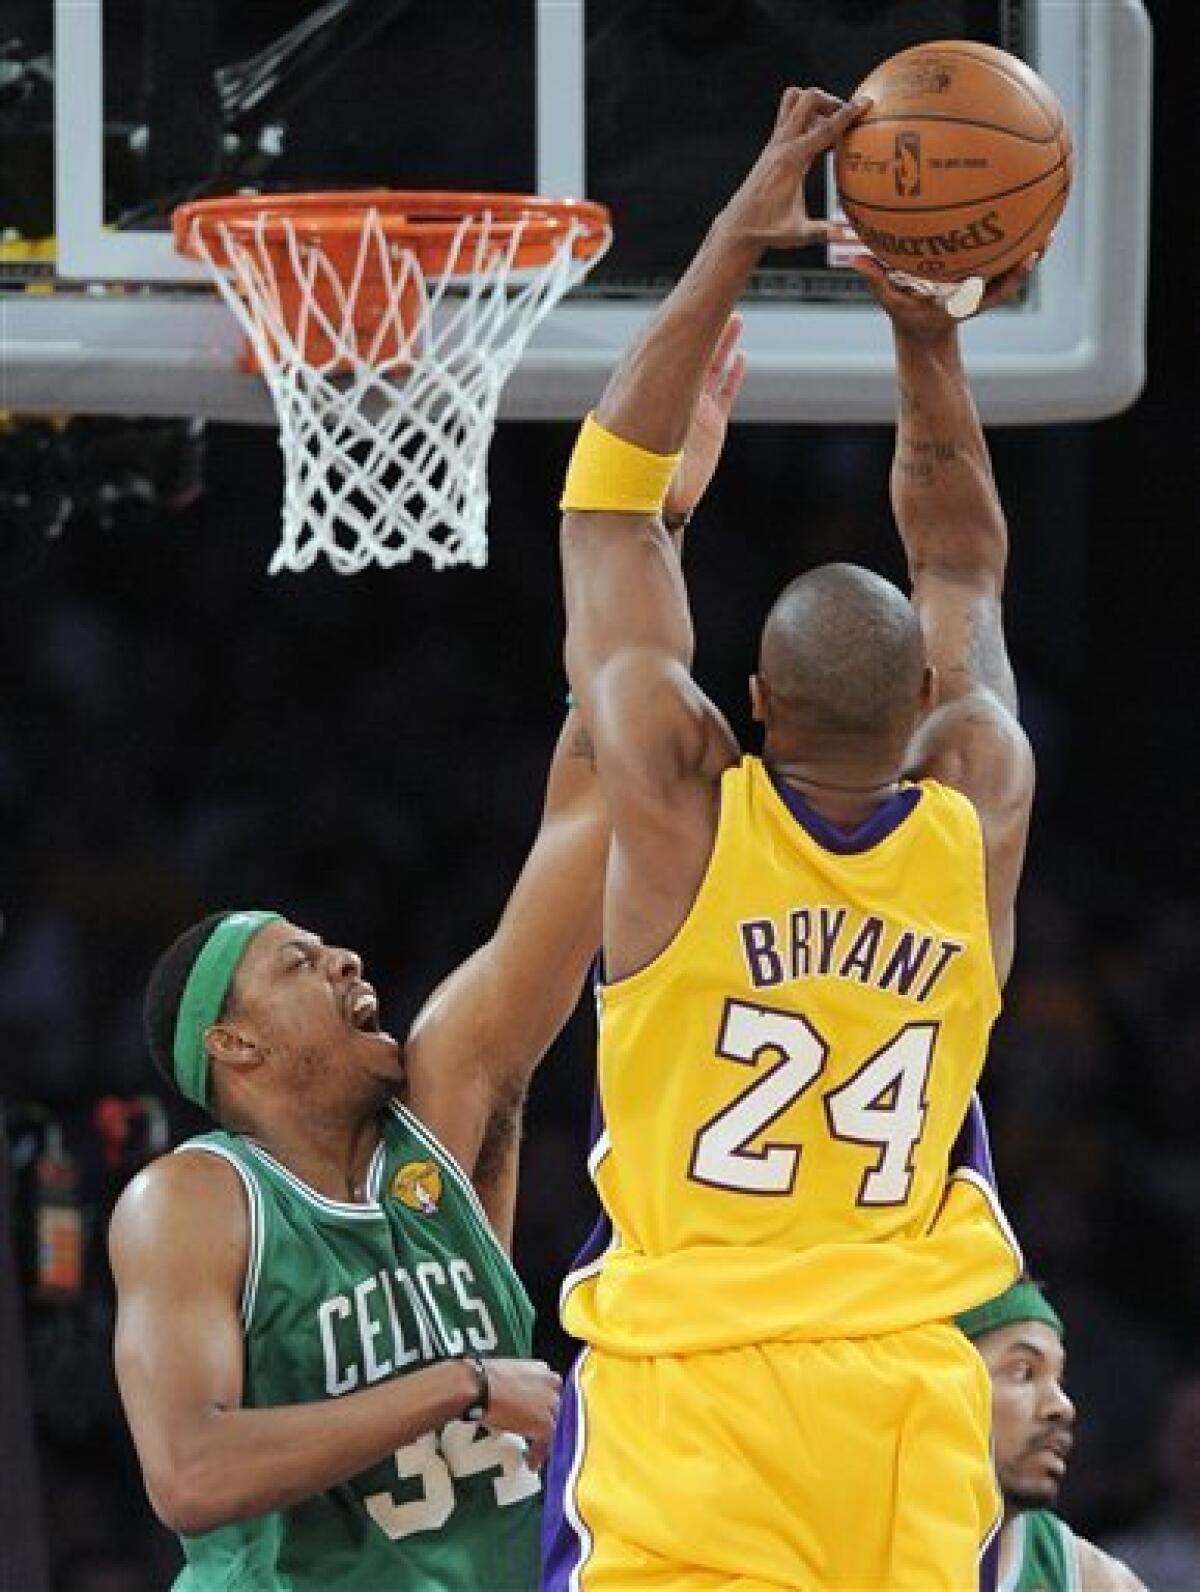 Los Angeles Lakers guard Kobe Bryant (24) dunks over Boston Celtics forward  Paul Pierce during fourth quarter action at Staples Center in Los Angeles  on December 30, 2007. The Celtics defeated the